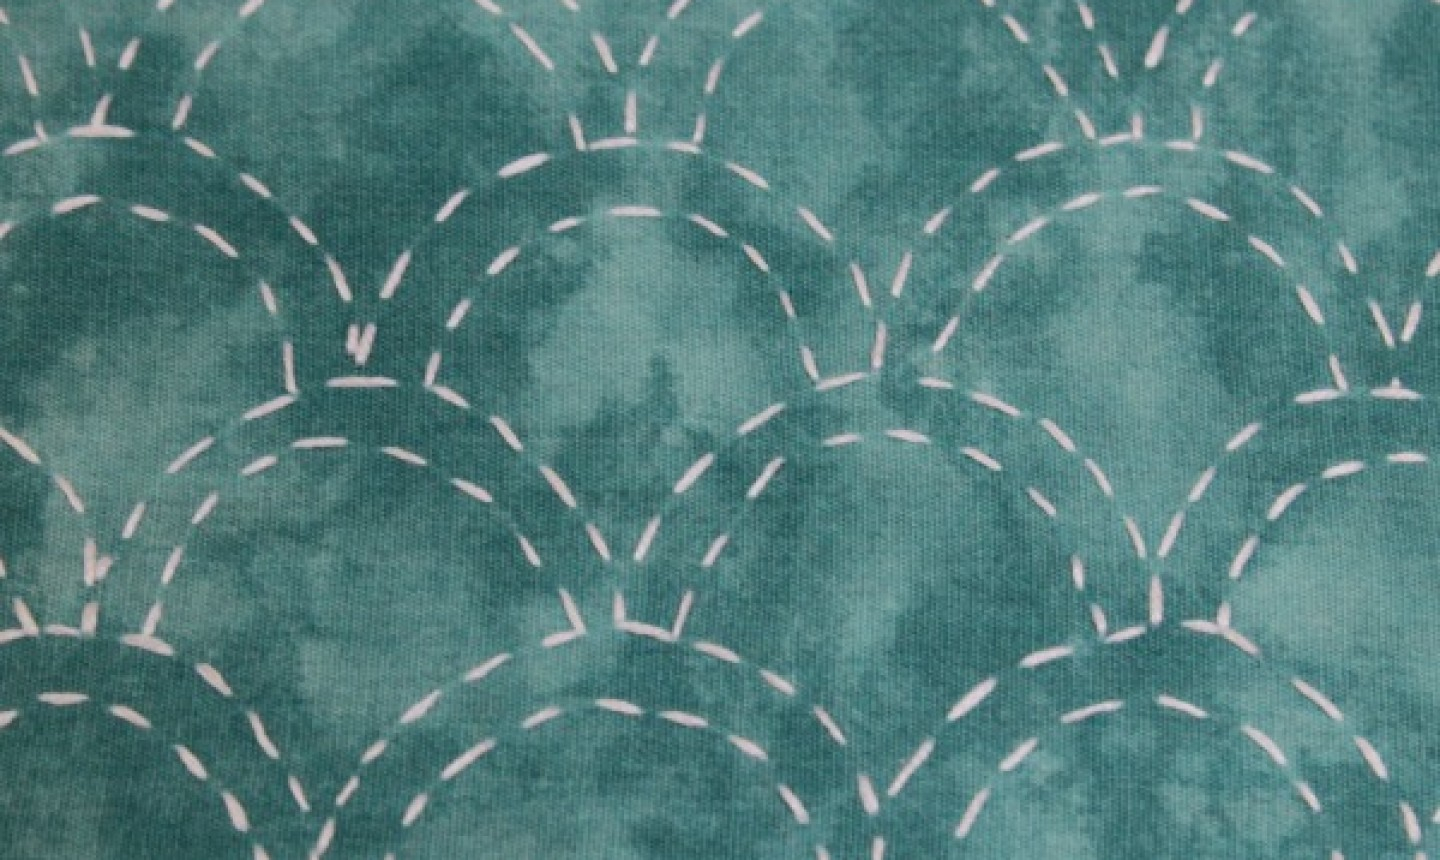 Sashiko Embroidery Patterns Free Learn Simple Sashiko Embroidery With This Whimsical Cloud Pattern